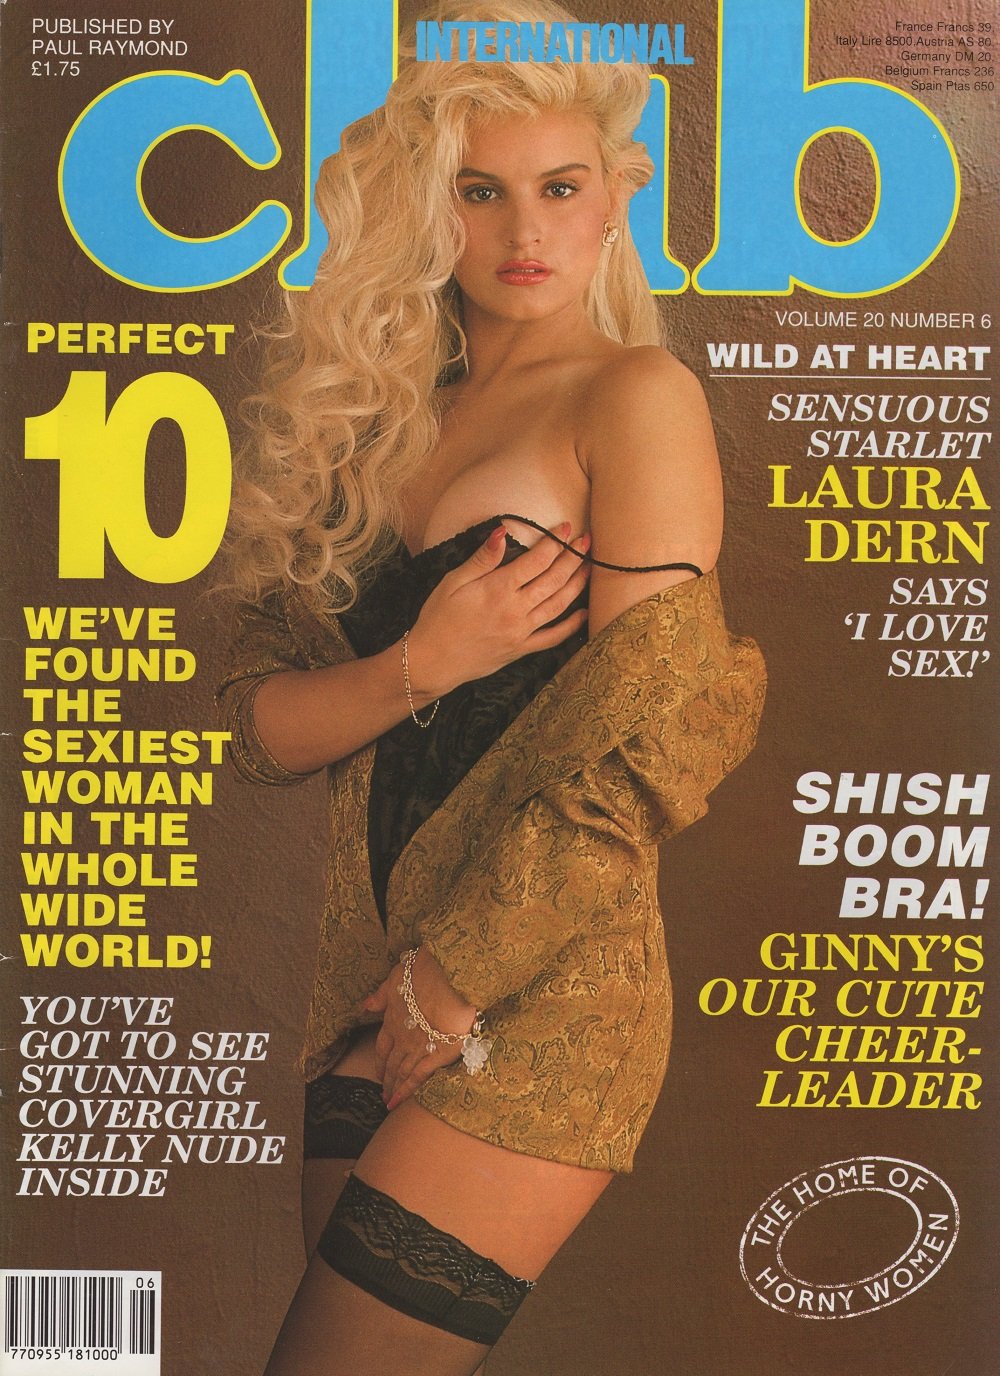 Club International UK Vol. 20 # 6 magazine back issue Club International UK magizine back copy Club International UK Vol. 20 # 6 Vintage Adult Magazine Back Issue Published by Paul Raymond Publishing Group. Wild At Heart Sensuous Starlet Laura Dern Says I Love Sex!.